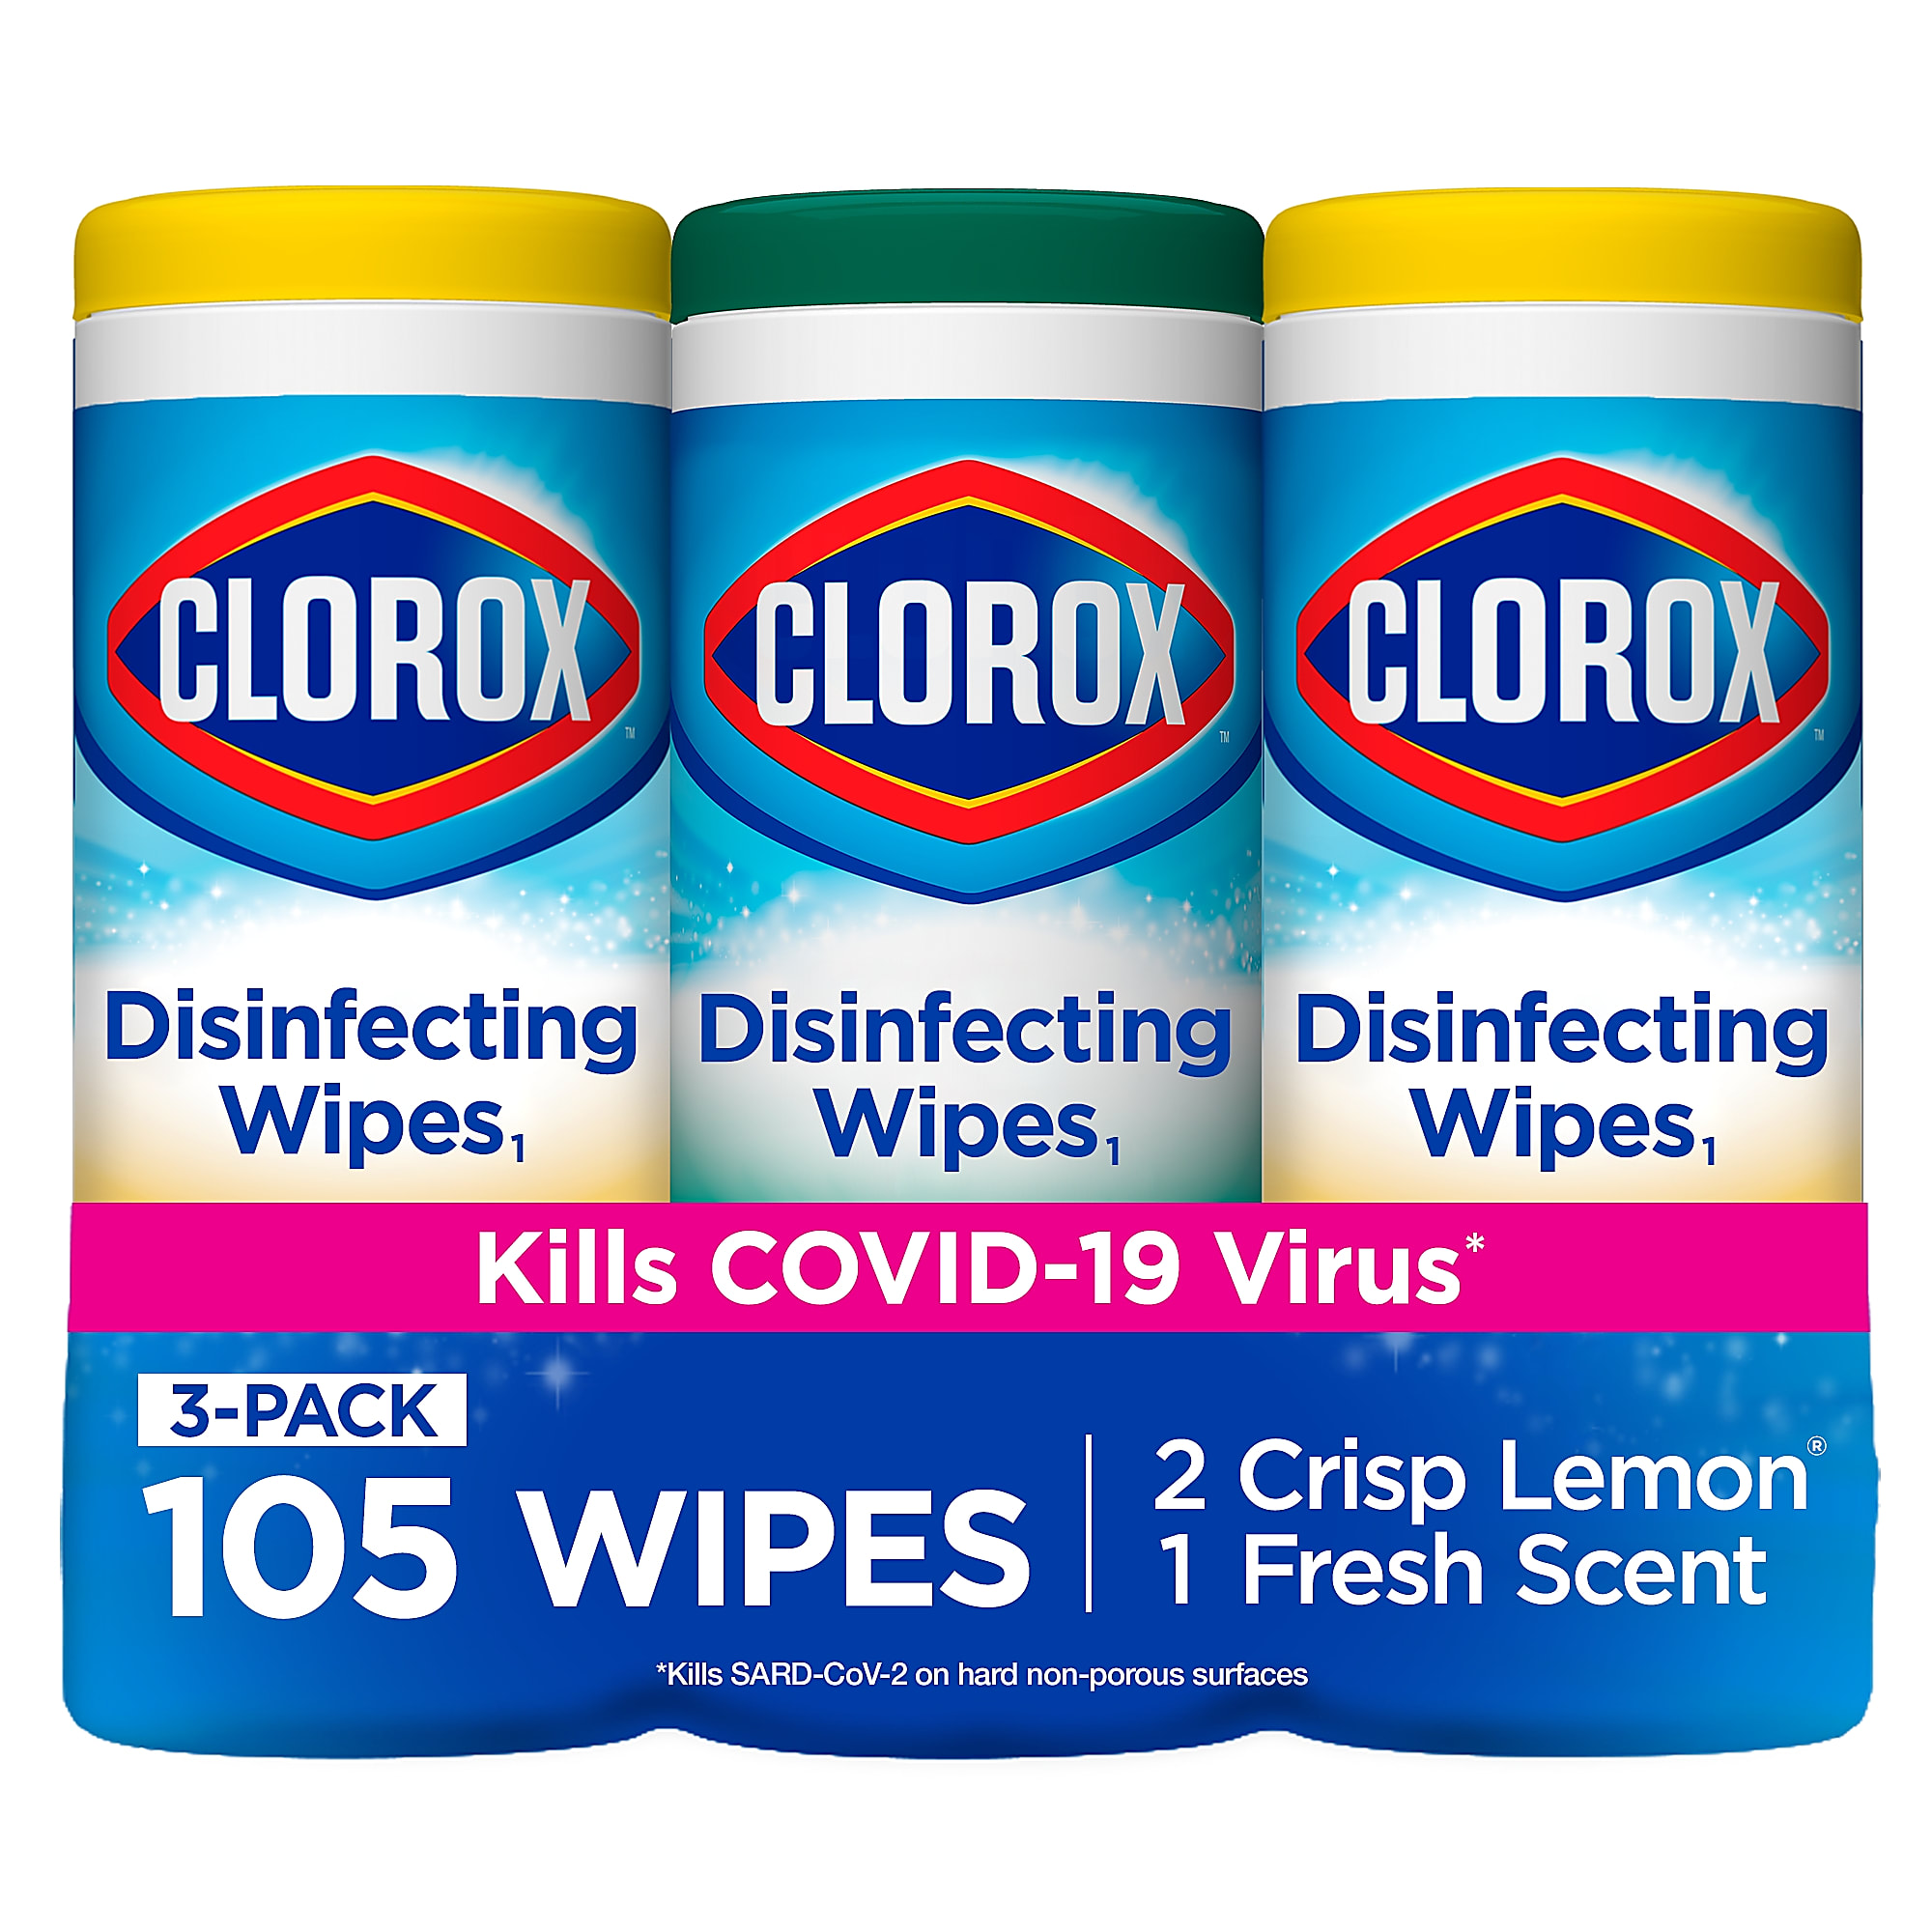 3-Pack 35 Count Clorox Bleach Free Cleaning & Disinfecting Wipes Value Pack $5 ($1.67 each) + Free Store Pickup at OfficeDepot and OfficeMax